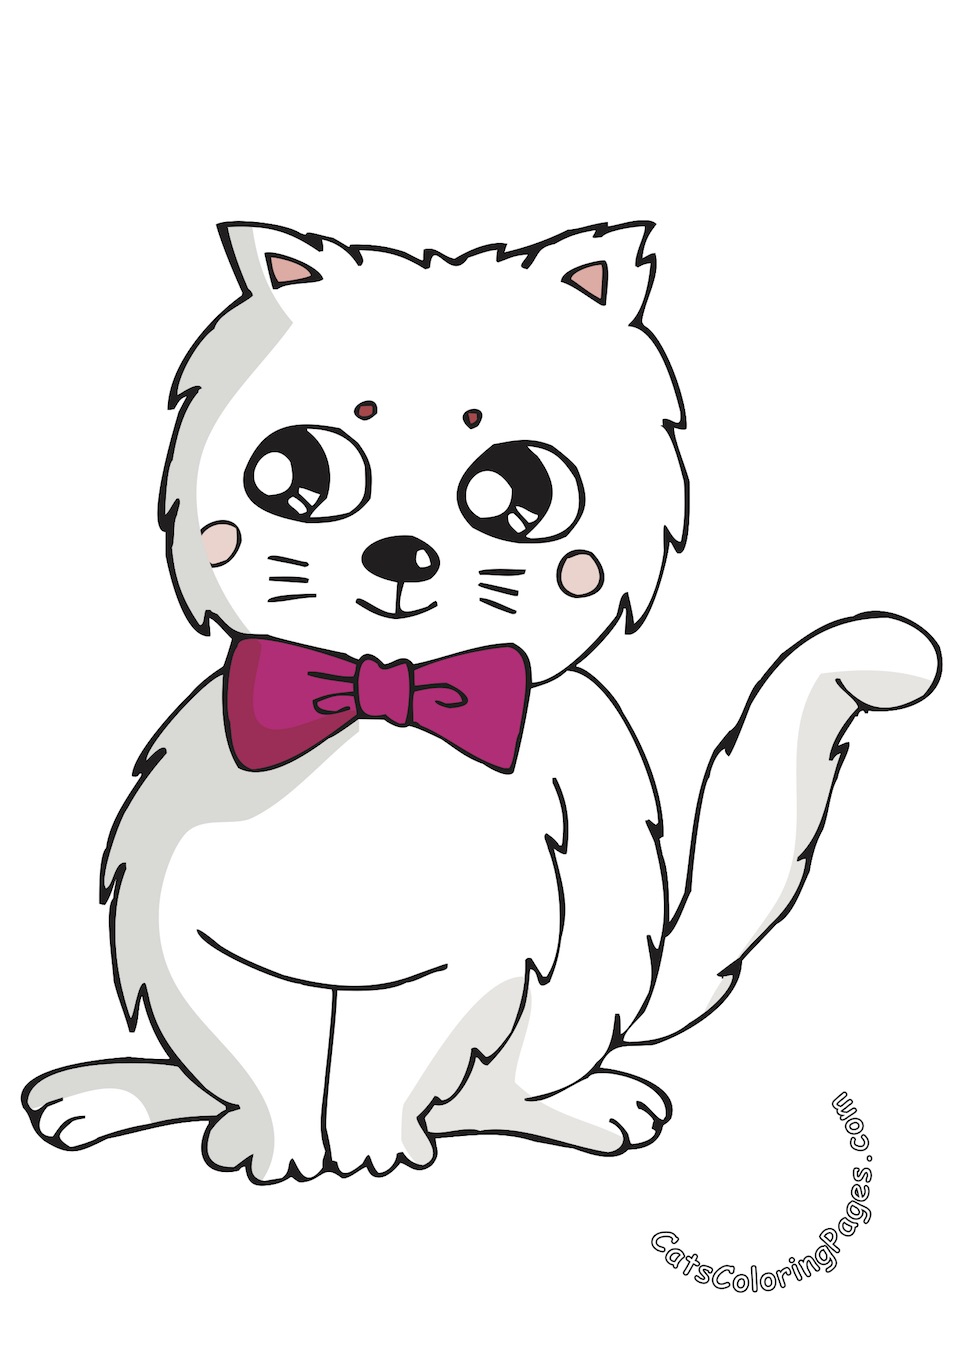 Cat with Bow Tie Colored Coloring Page